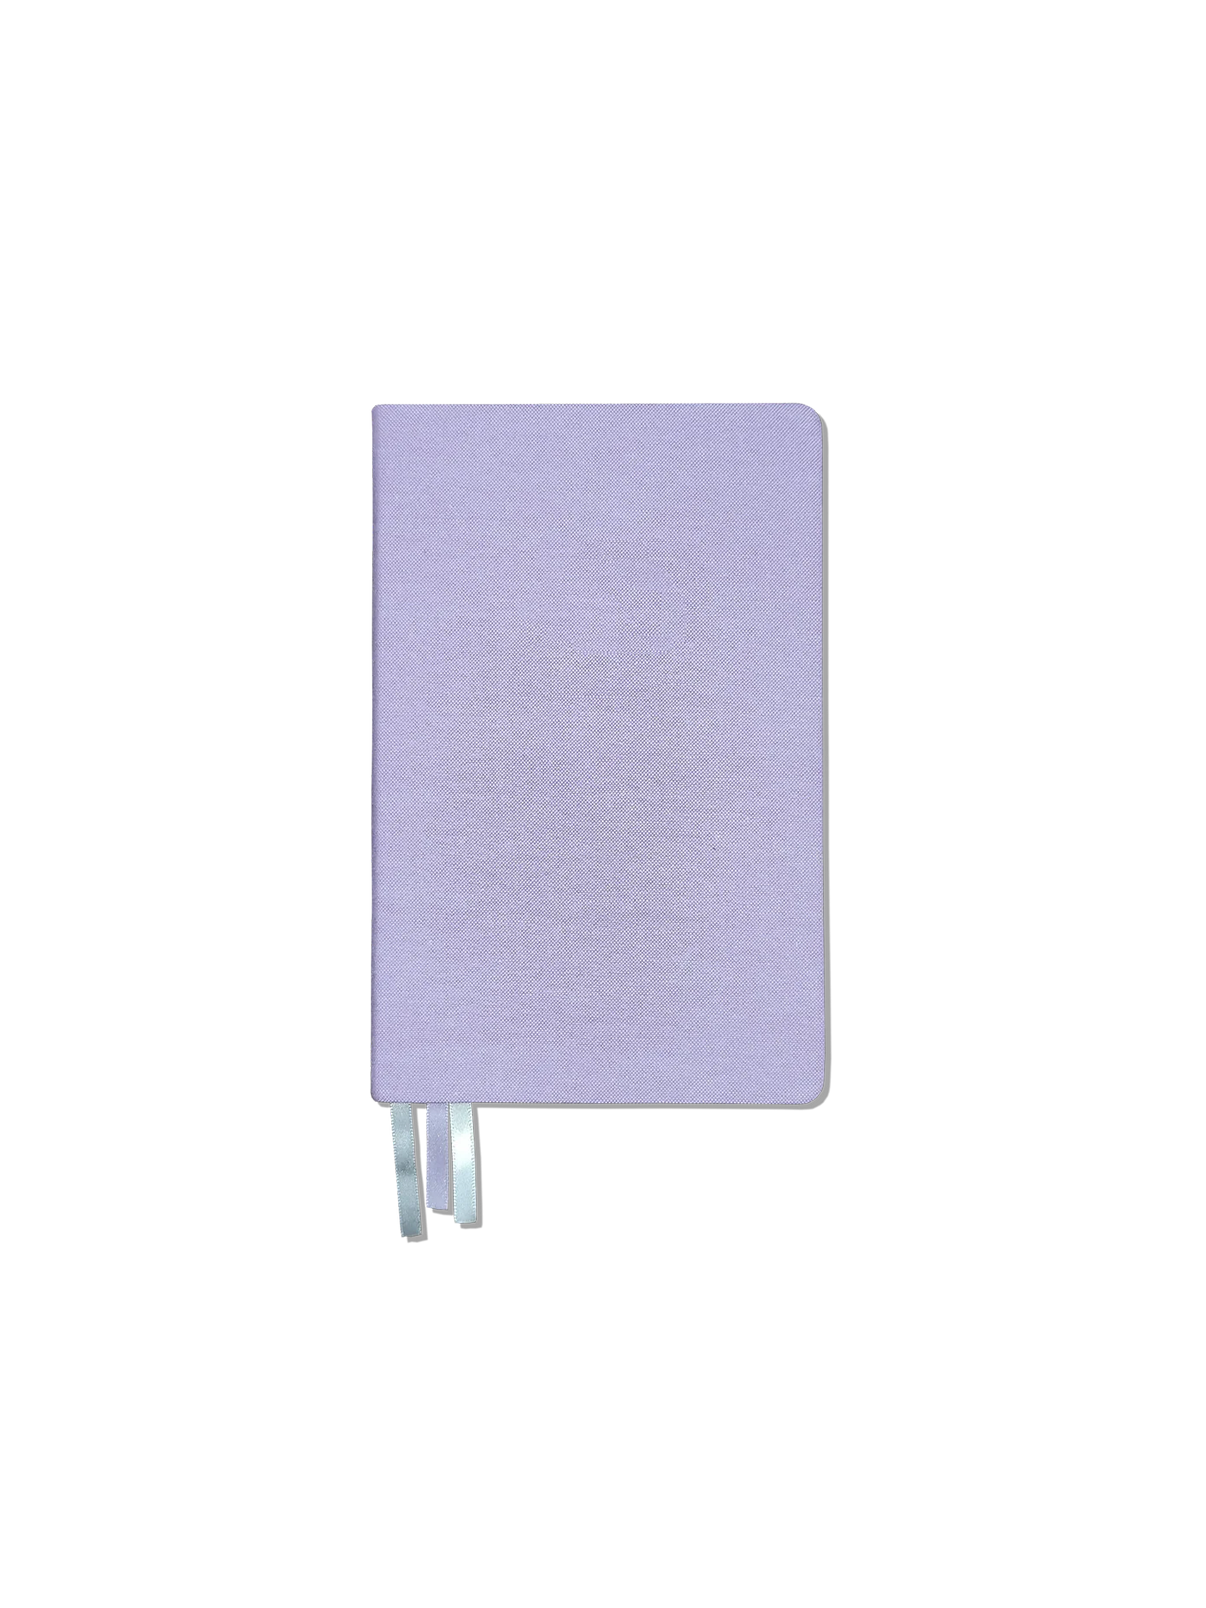 Wide Ruled Notebooks